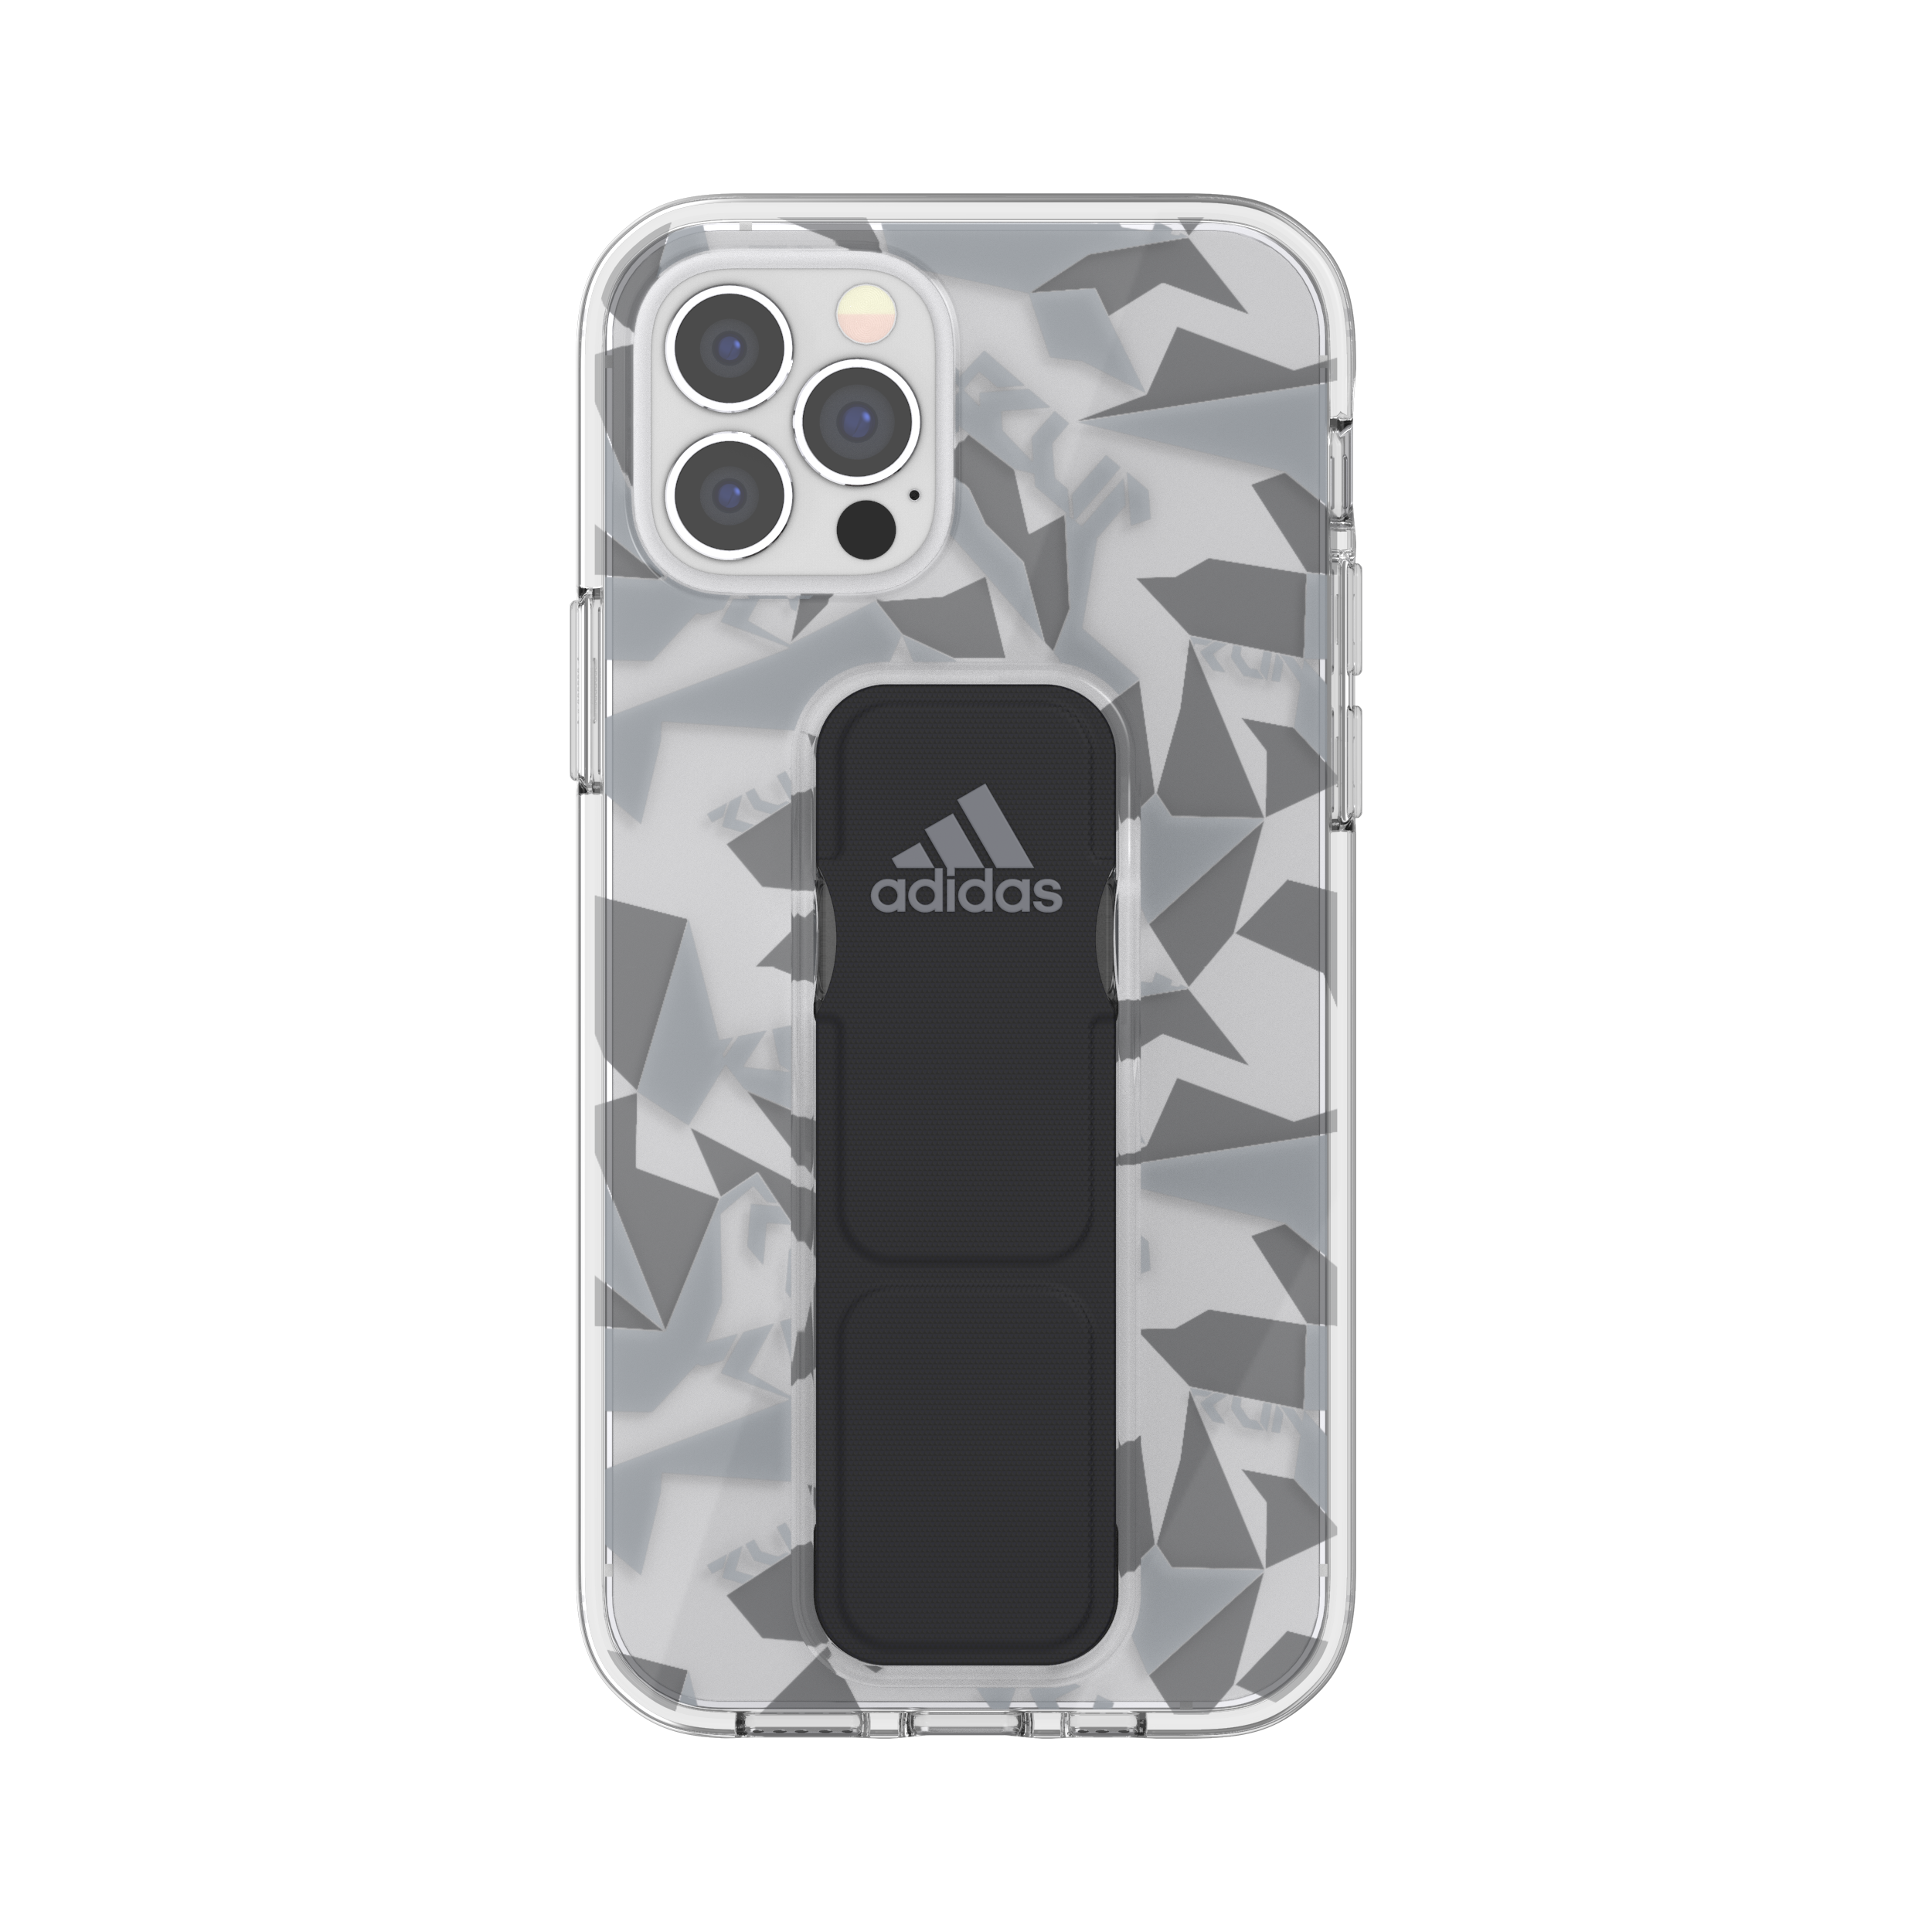 adidas SPORT Apple iPhone 12 / 12 Pro Clear Grip Case - Back cover w/ Grip or Stand, Scratch & Drop Protection w/ TPU Bumper, Wireless Charging Compatible - Grey/Black